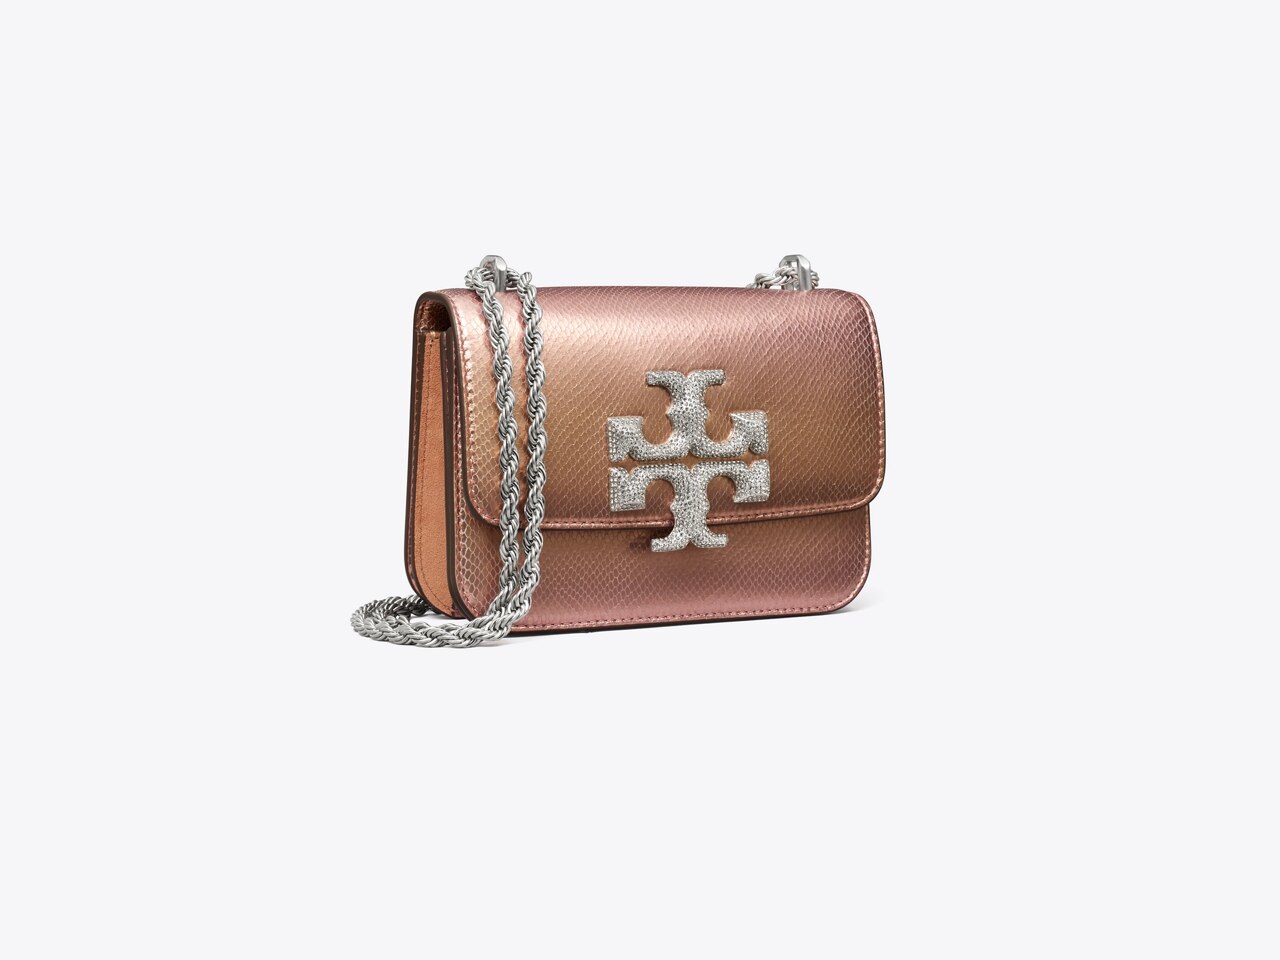 Tory Burch Eleanor Small Canvas & Leather Convertible Shoulder Bag